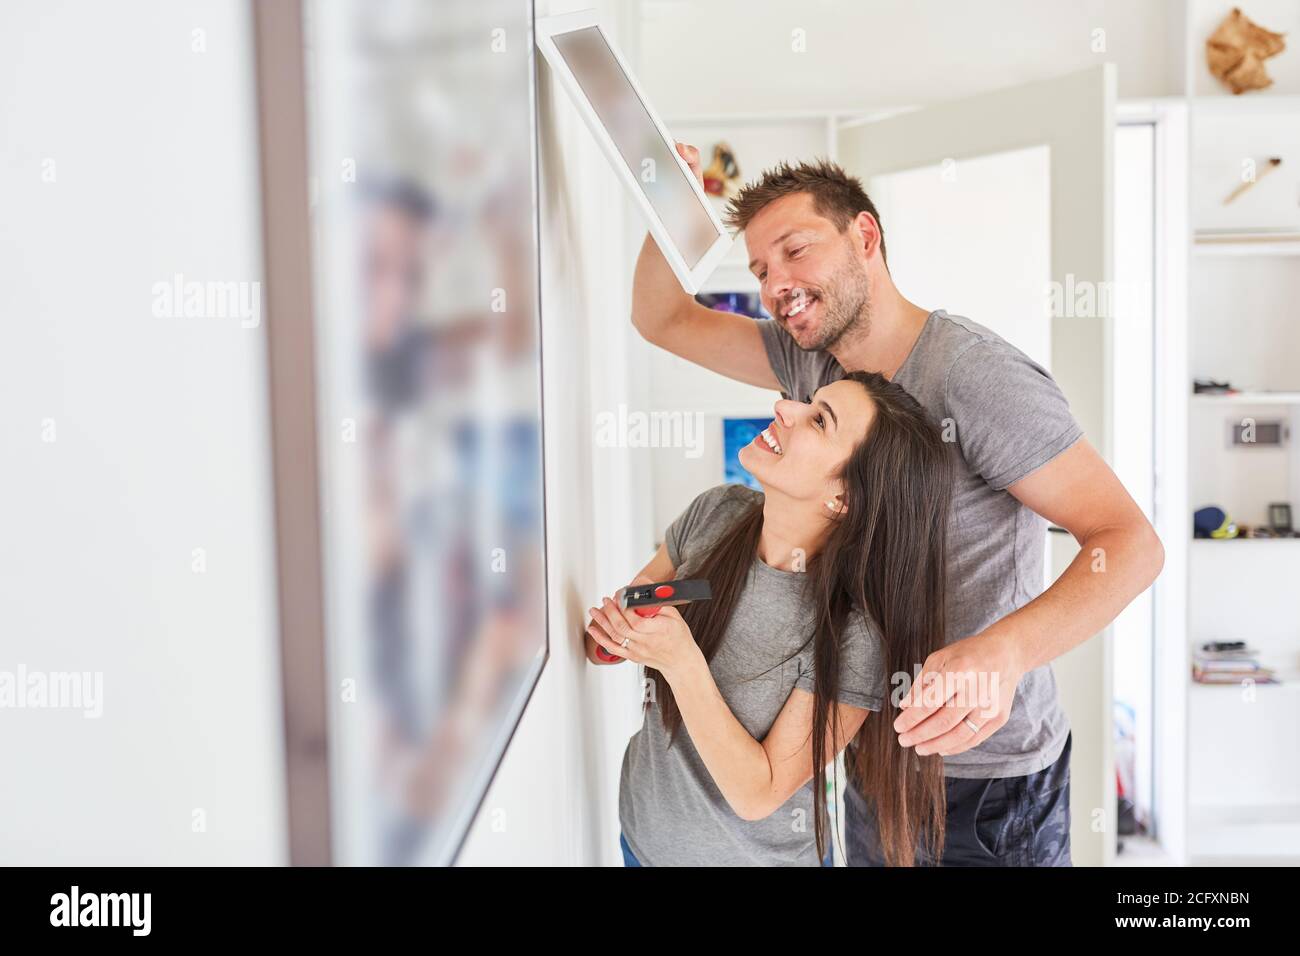 Handyman couple fasten a picture frame to the wall with hammer and nail Stock Photo